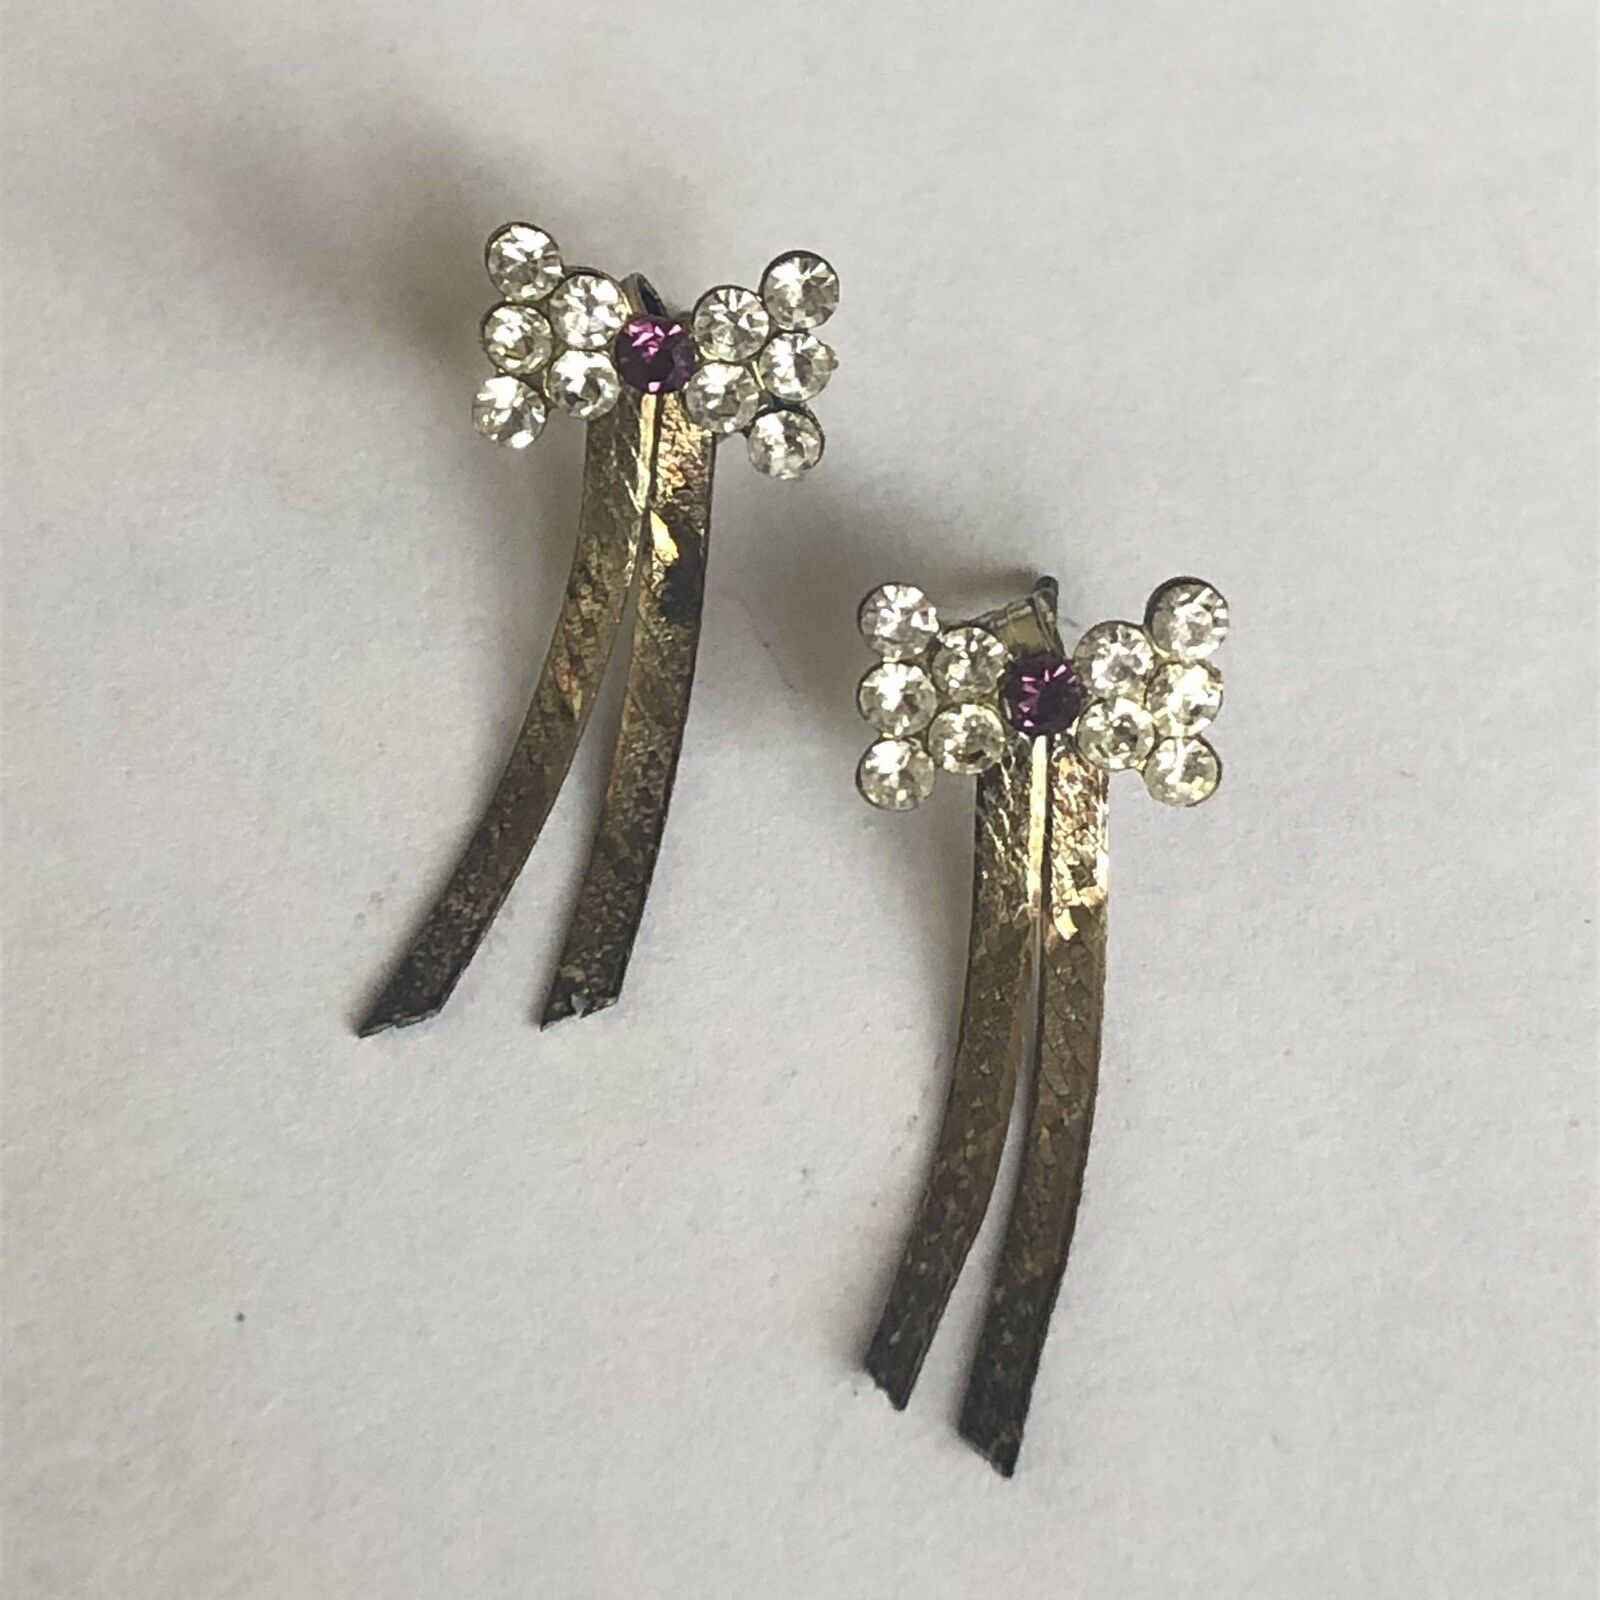 A pair of vintage silver stylised bow earrings - Image 2 of 4